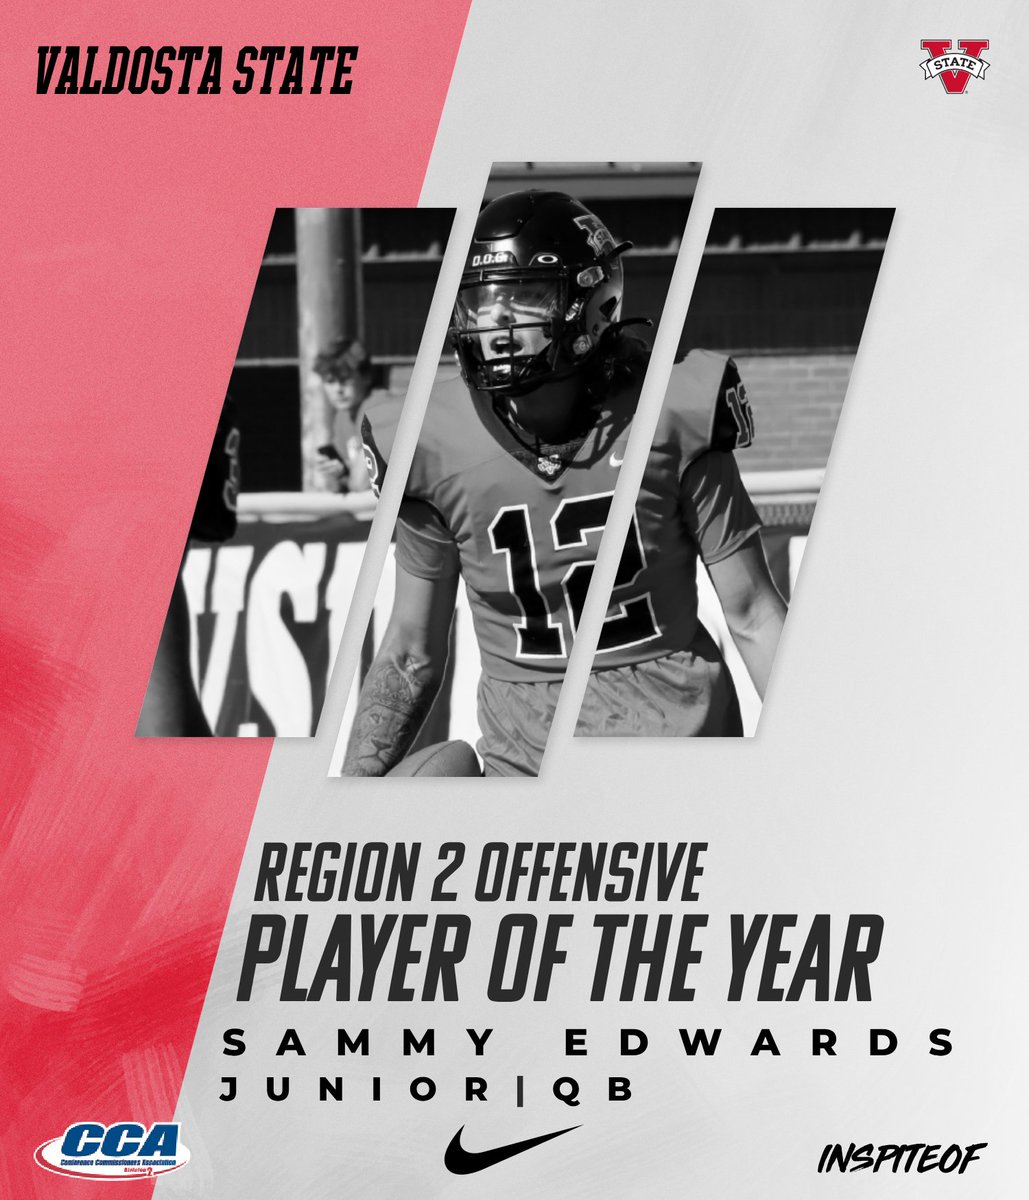 ⚫️🔴CONGRATULATIONS🔴⚫️ Junior QB, Sammy Edwards was named First-Team All Region for the 2023 Season. He was also named D2CCA Region 2 OFFENSIVE PLAYER OF THE YEAR 🔥🔥 His hard work and preparation through out the season put him a step above! #DOG #ISO #NotDoneYet